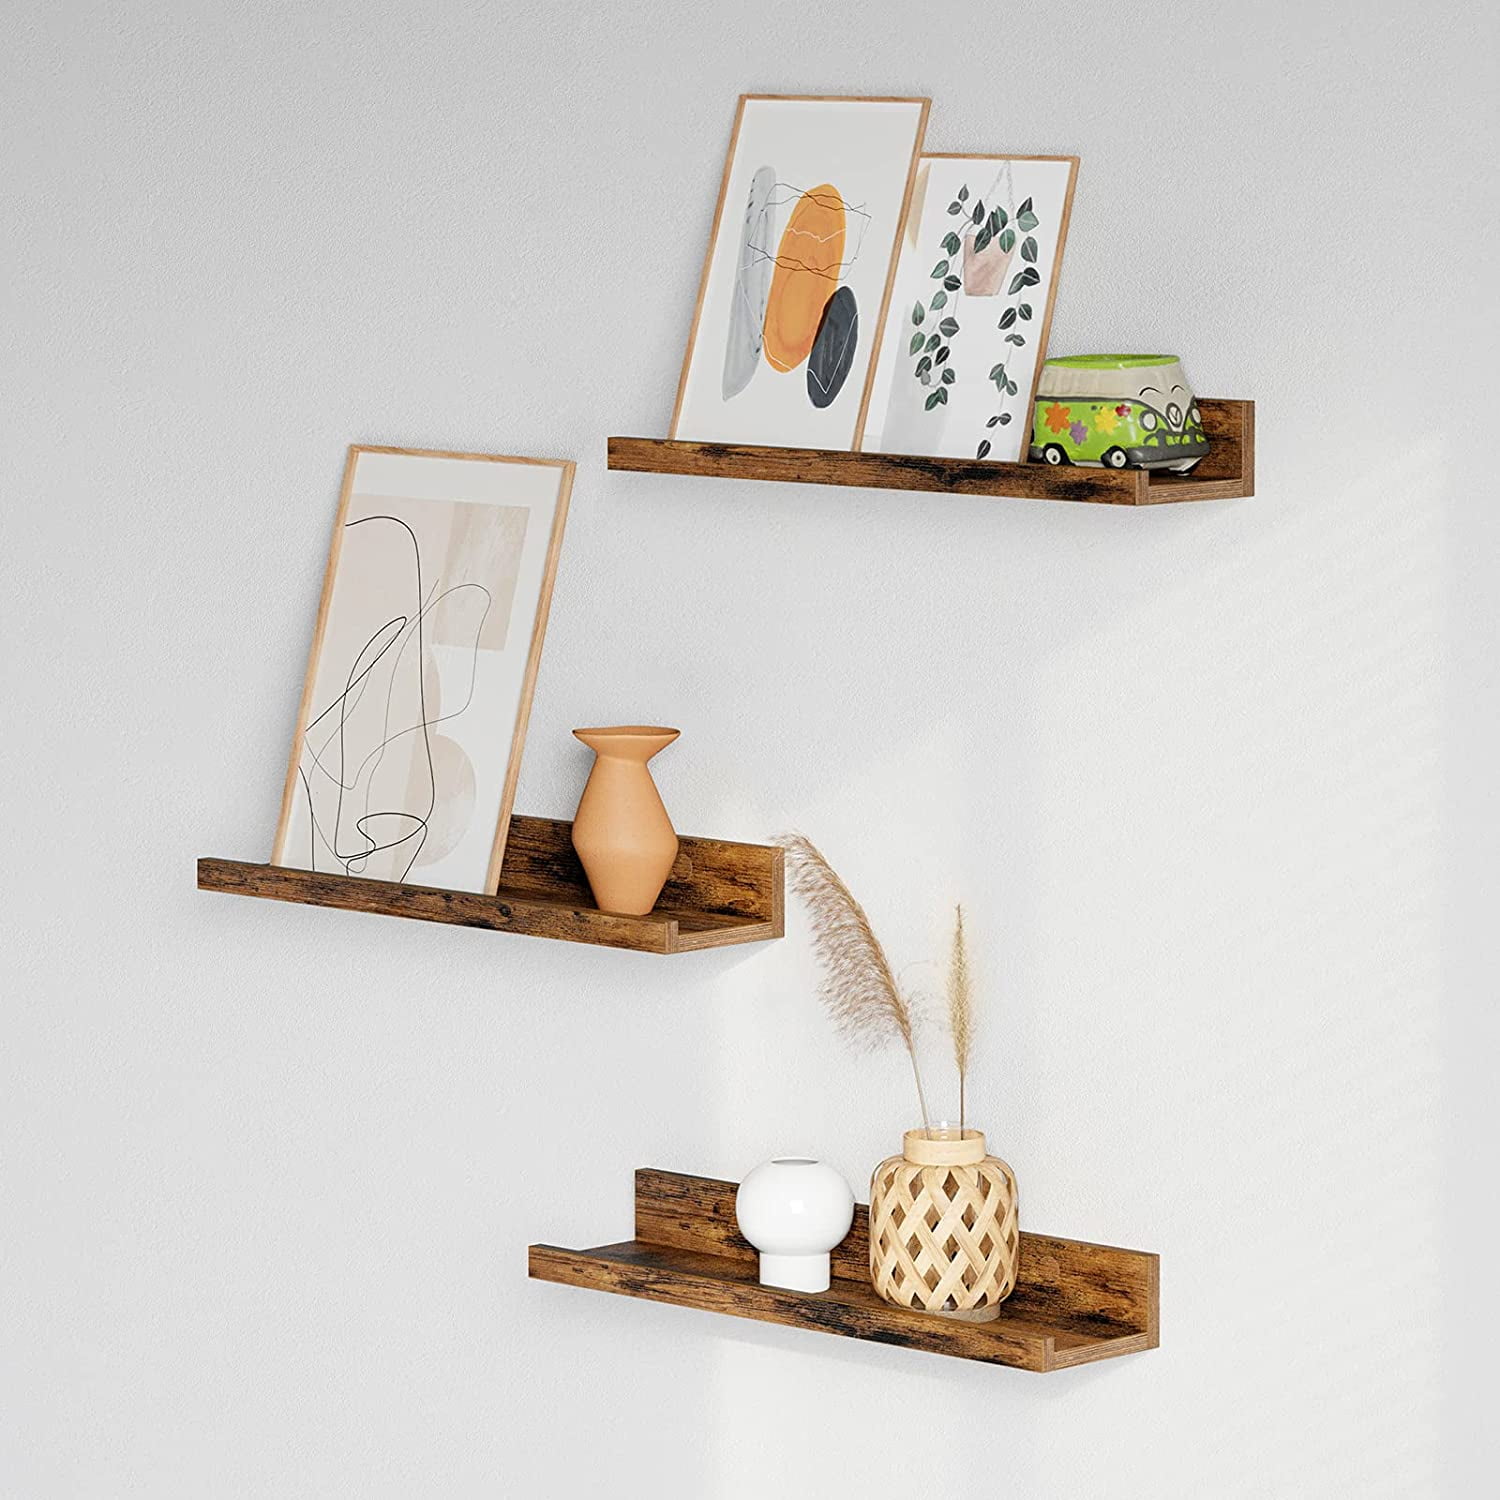 Hallway Entryway Set of 3 Cube Wall Shelves for Photos Office in Living Room Kitchen Decorations VASAGLE Floating Shelves Rustic Brown ULWS03BX